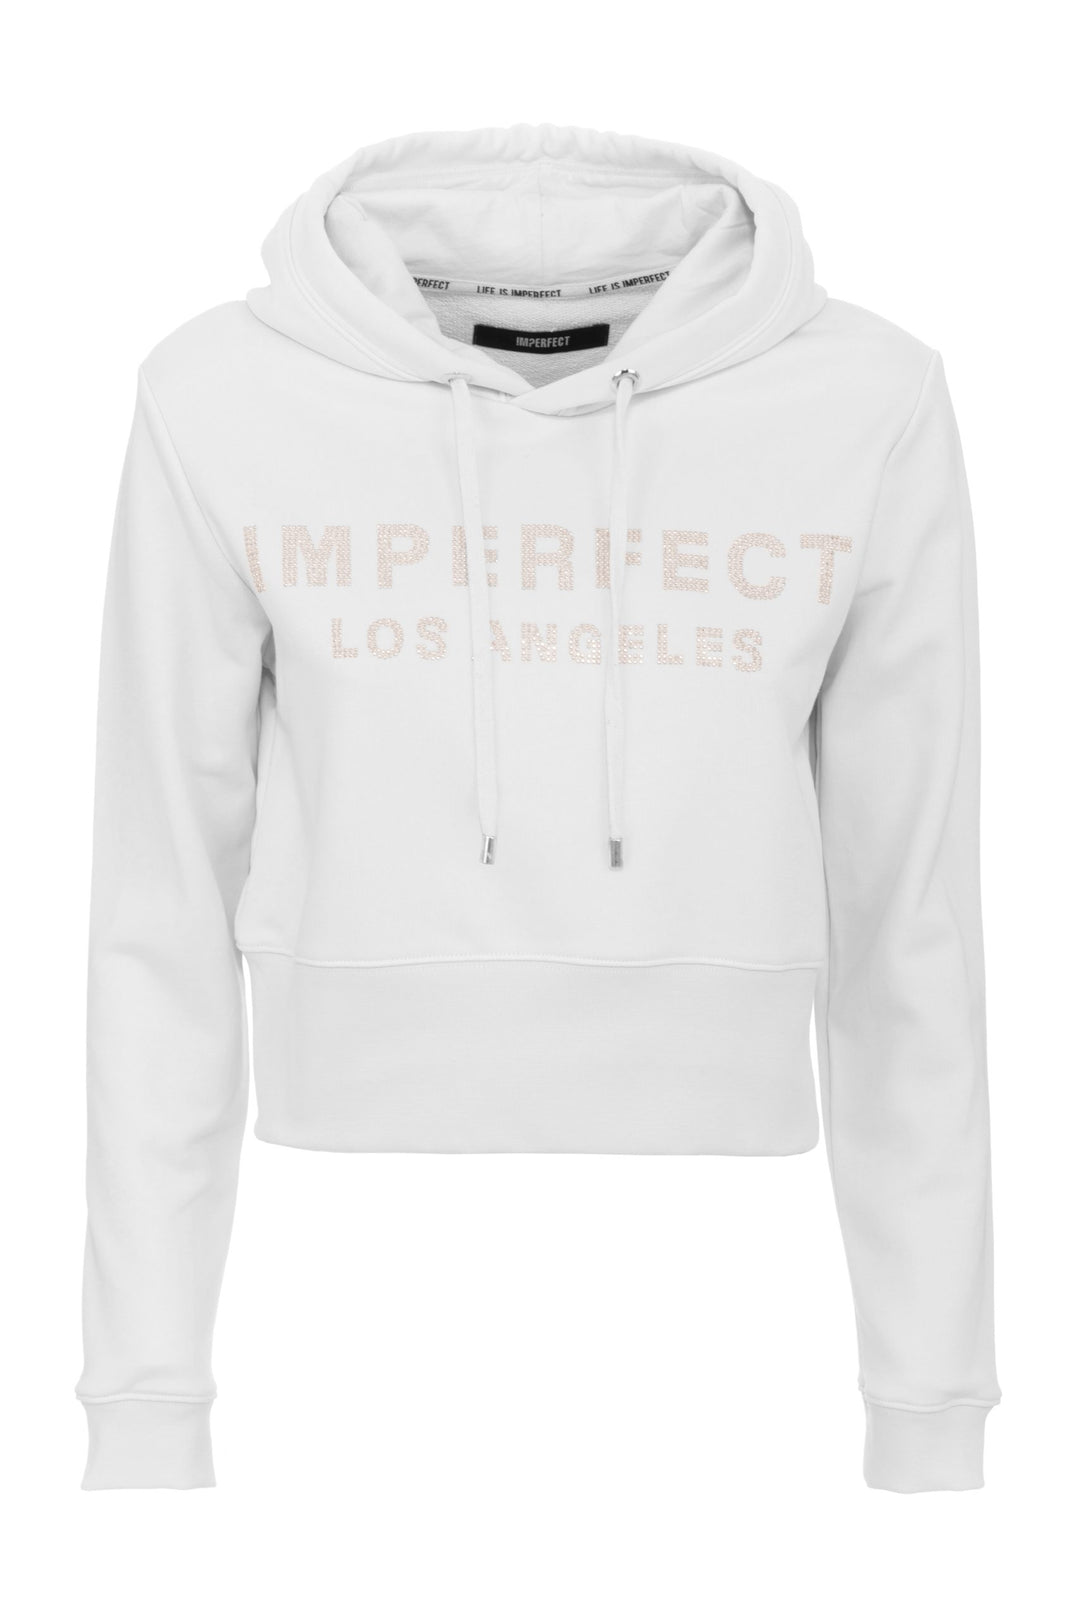 Imperfect White Cotton Sweater